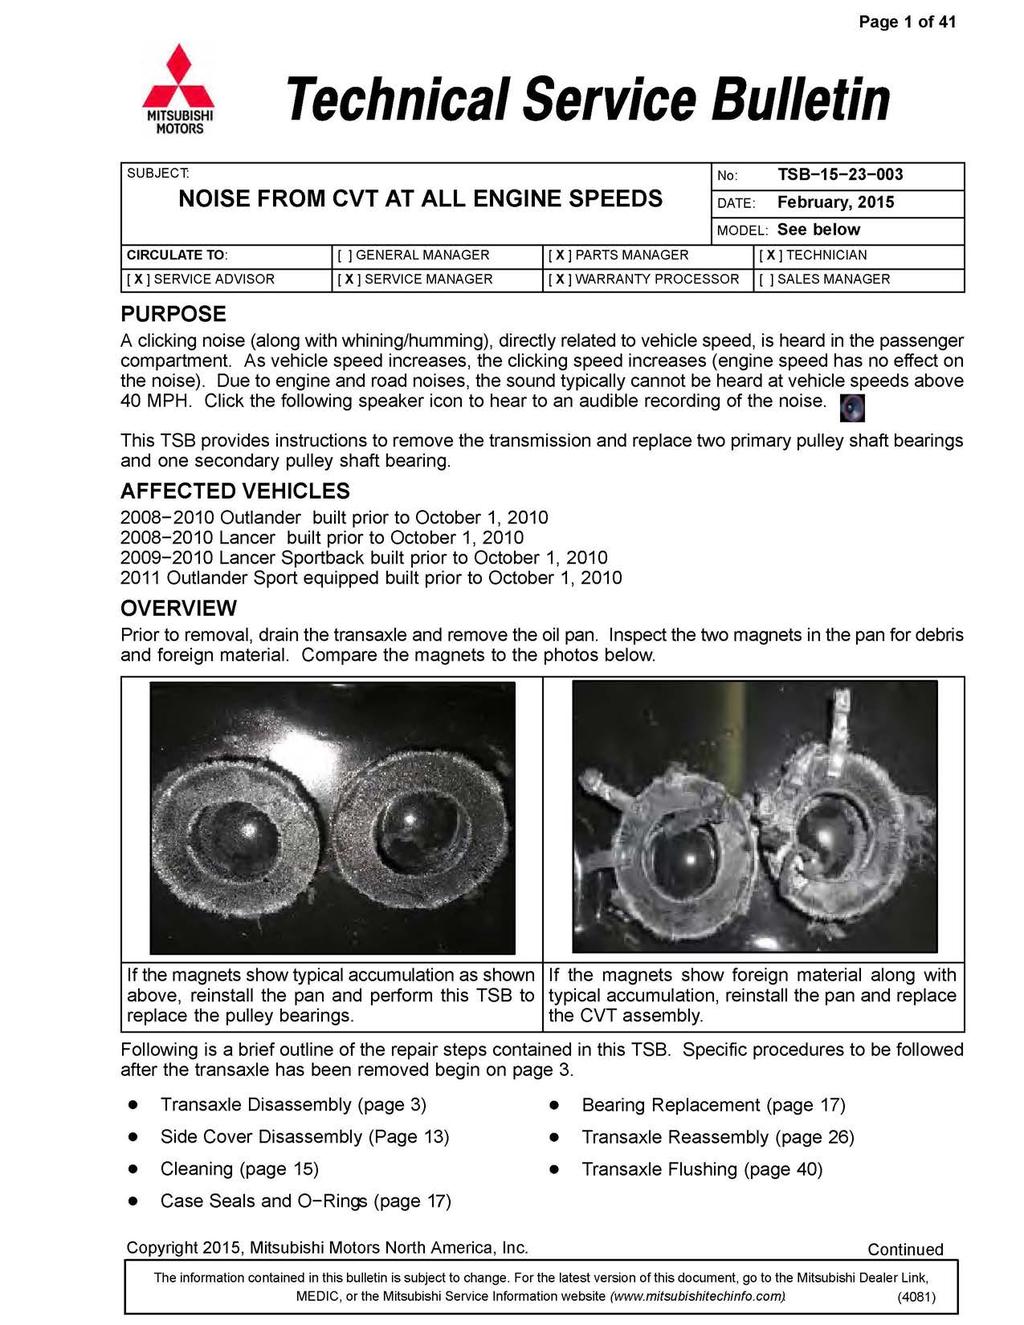 Page 1 of 41 MITSUBISHI MOTORS Technical Service Bulletin SUBJECT No: NOISE FROM CVT AT ALL ENGINE SPEEDS DATE: February, 2015 MODEL: See below CIRCULATE TO: I[ ]GENERAL MANAGER I [ X l PARTS MANAGER